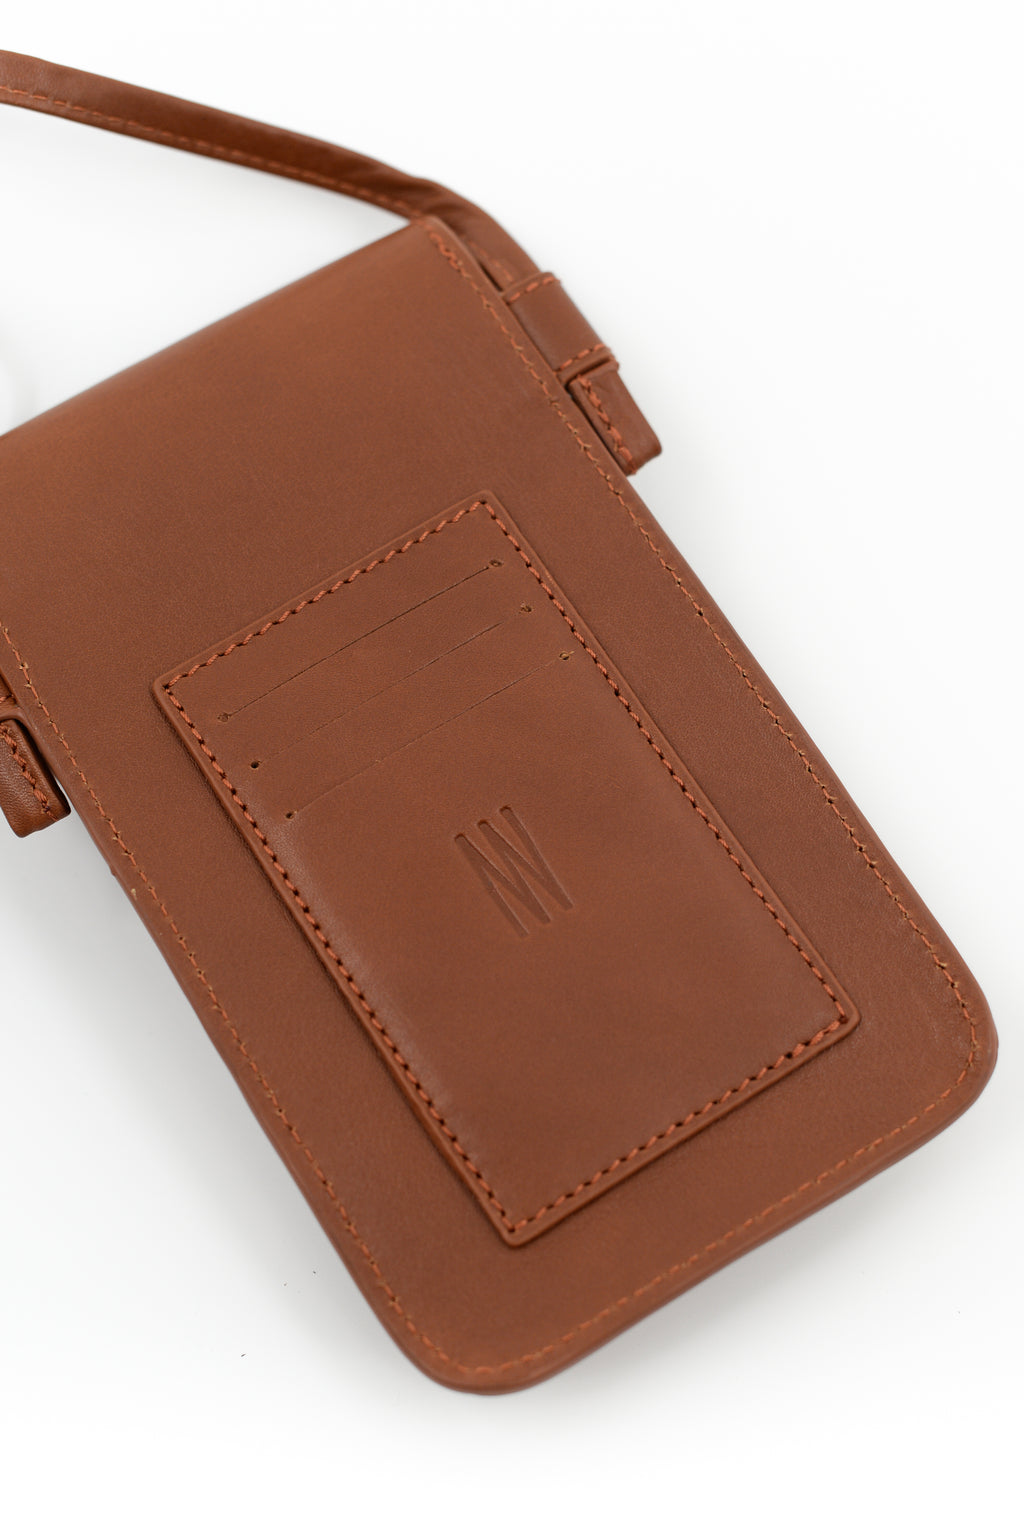 Smartphone bag in cognac nappa leather